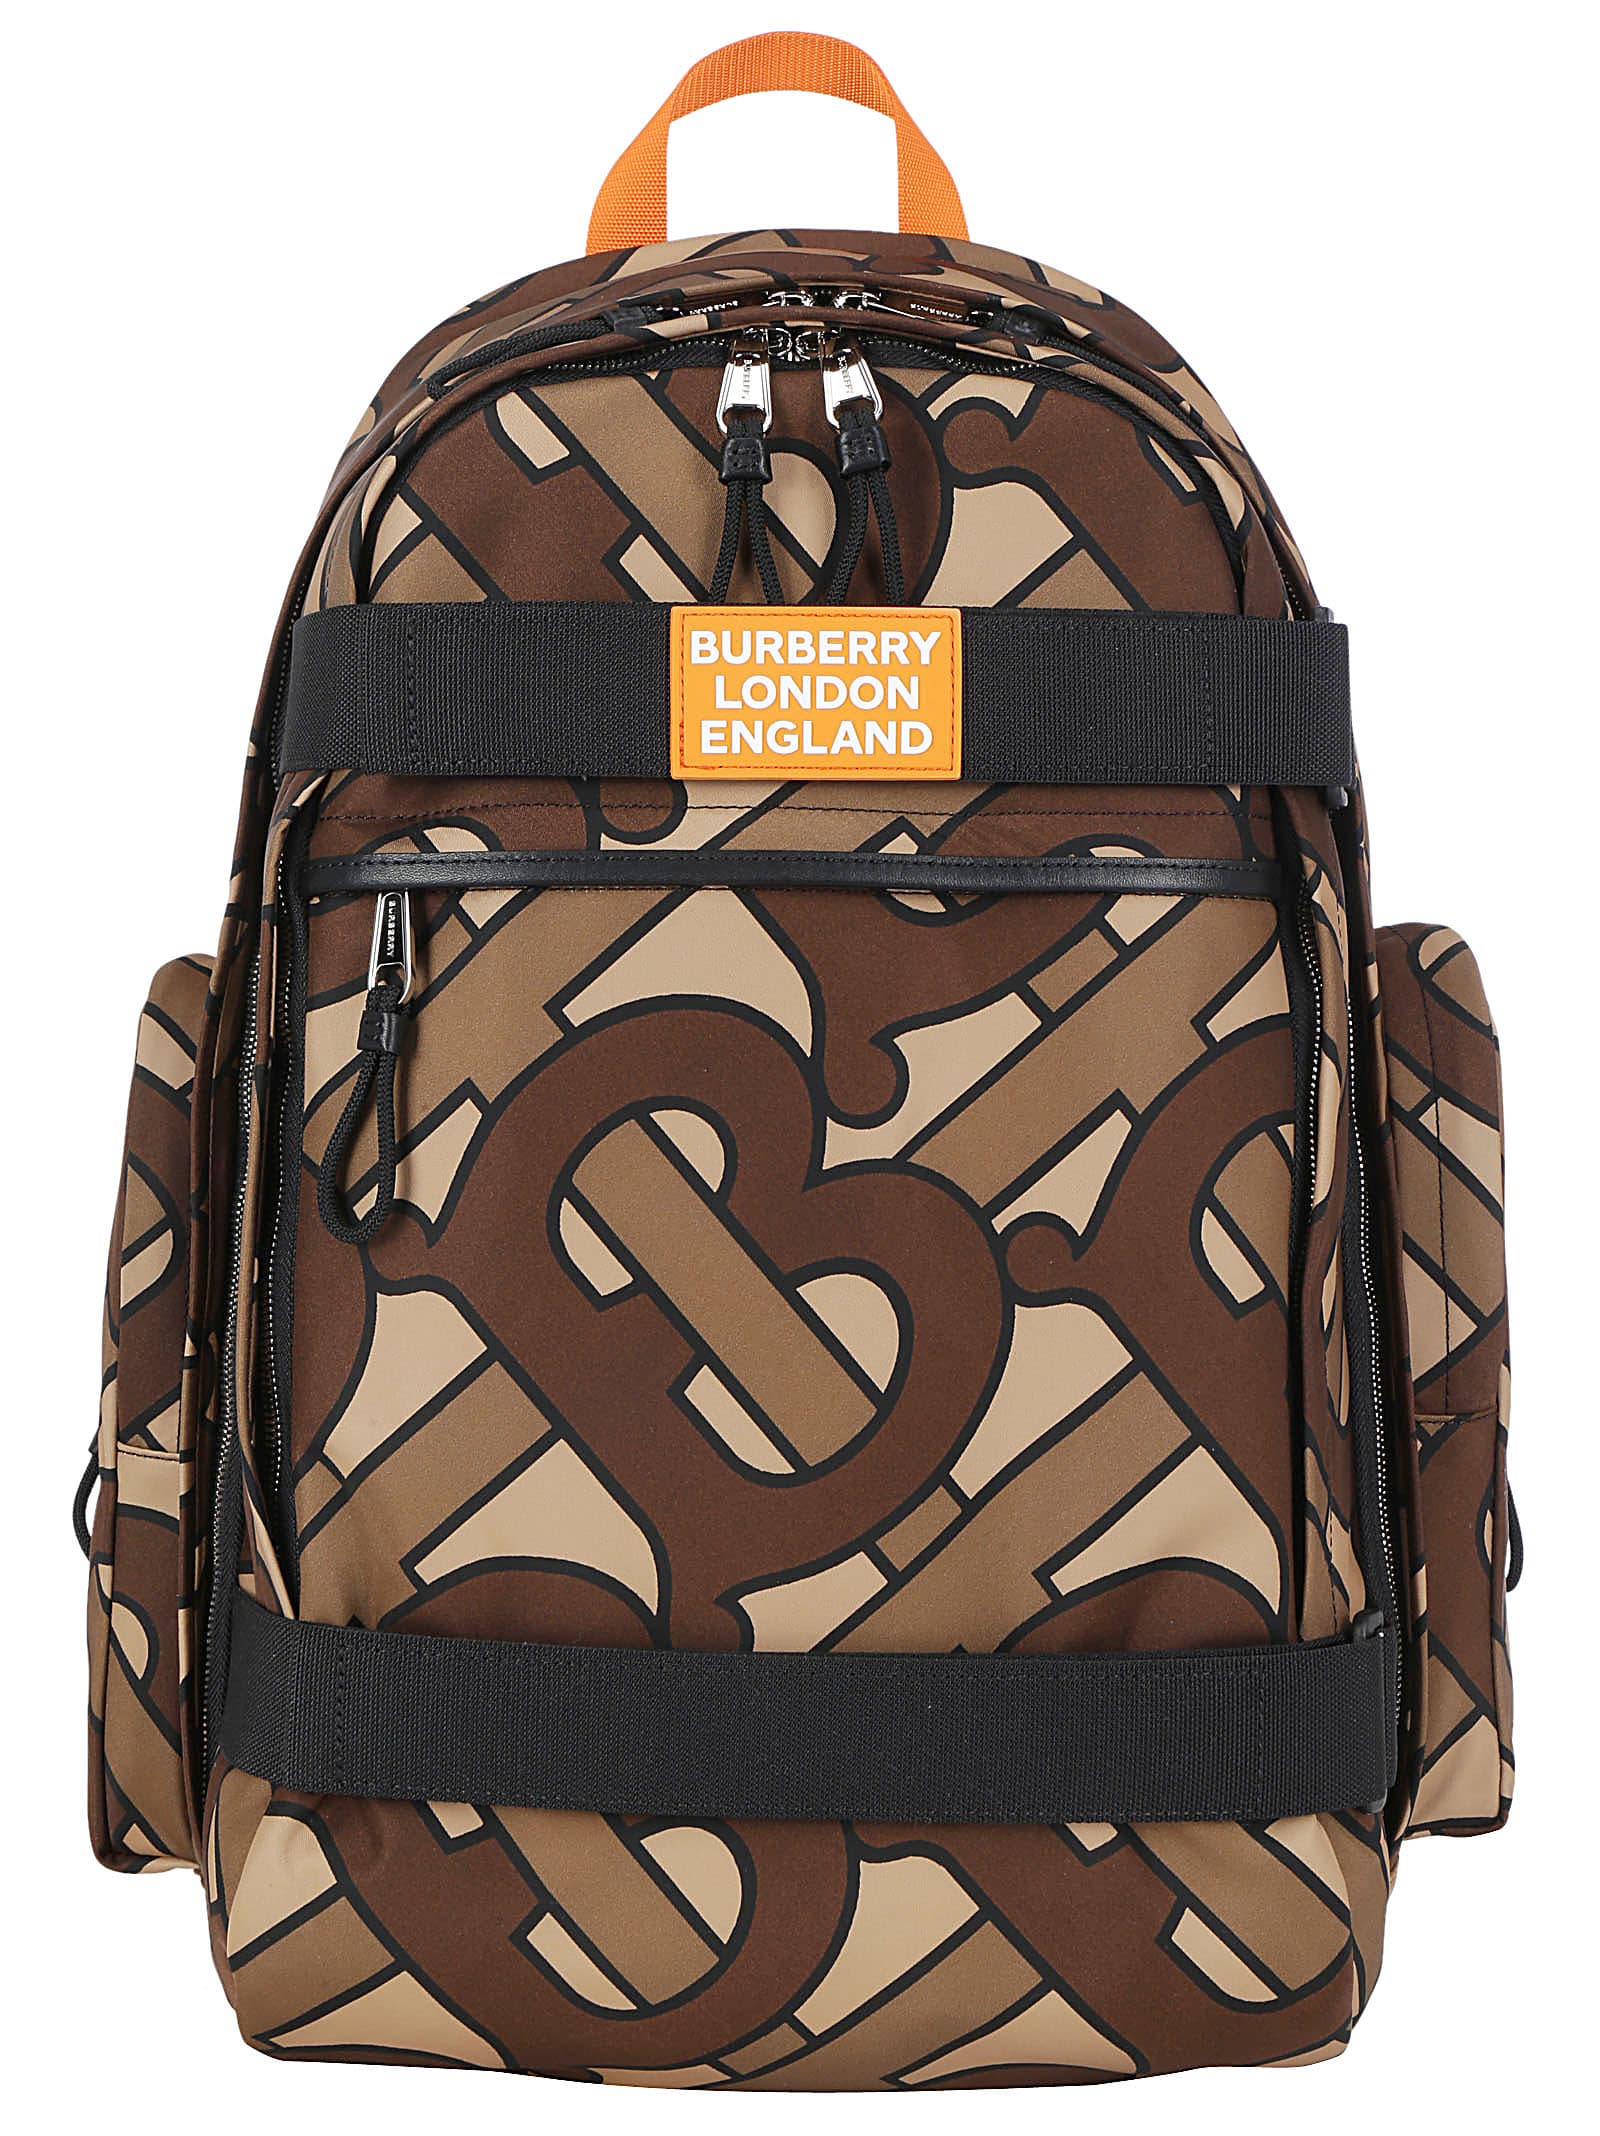 BURBERRY BACKPACK,11243766